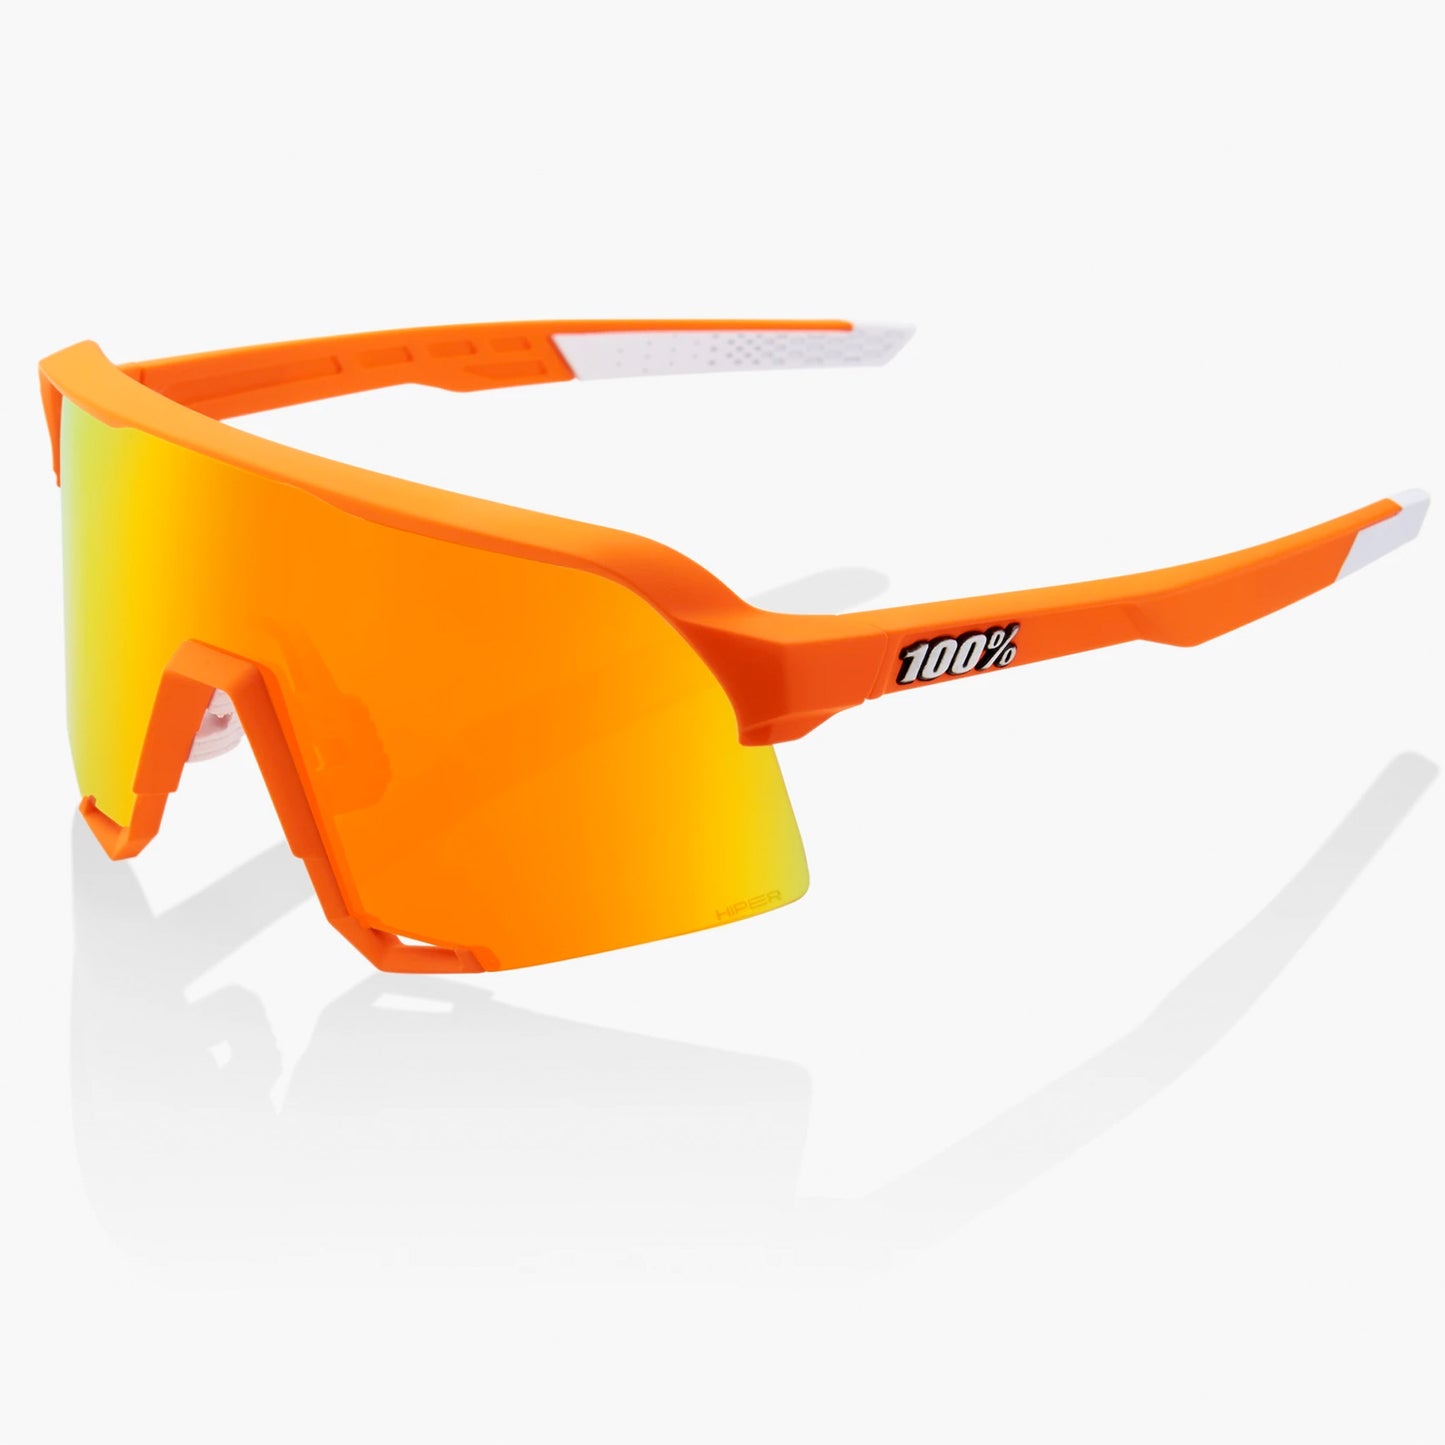 100% S3 Cycling Sunglassesd - Soft Tact Neon Orange with Hiper Red Multilayer Mirror Lens + Clear Lens, buy online at Woolys Wheels with free delivery